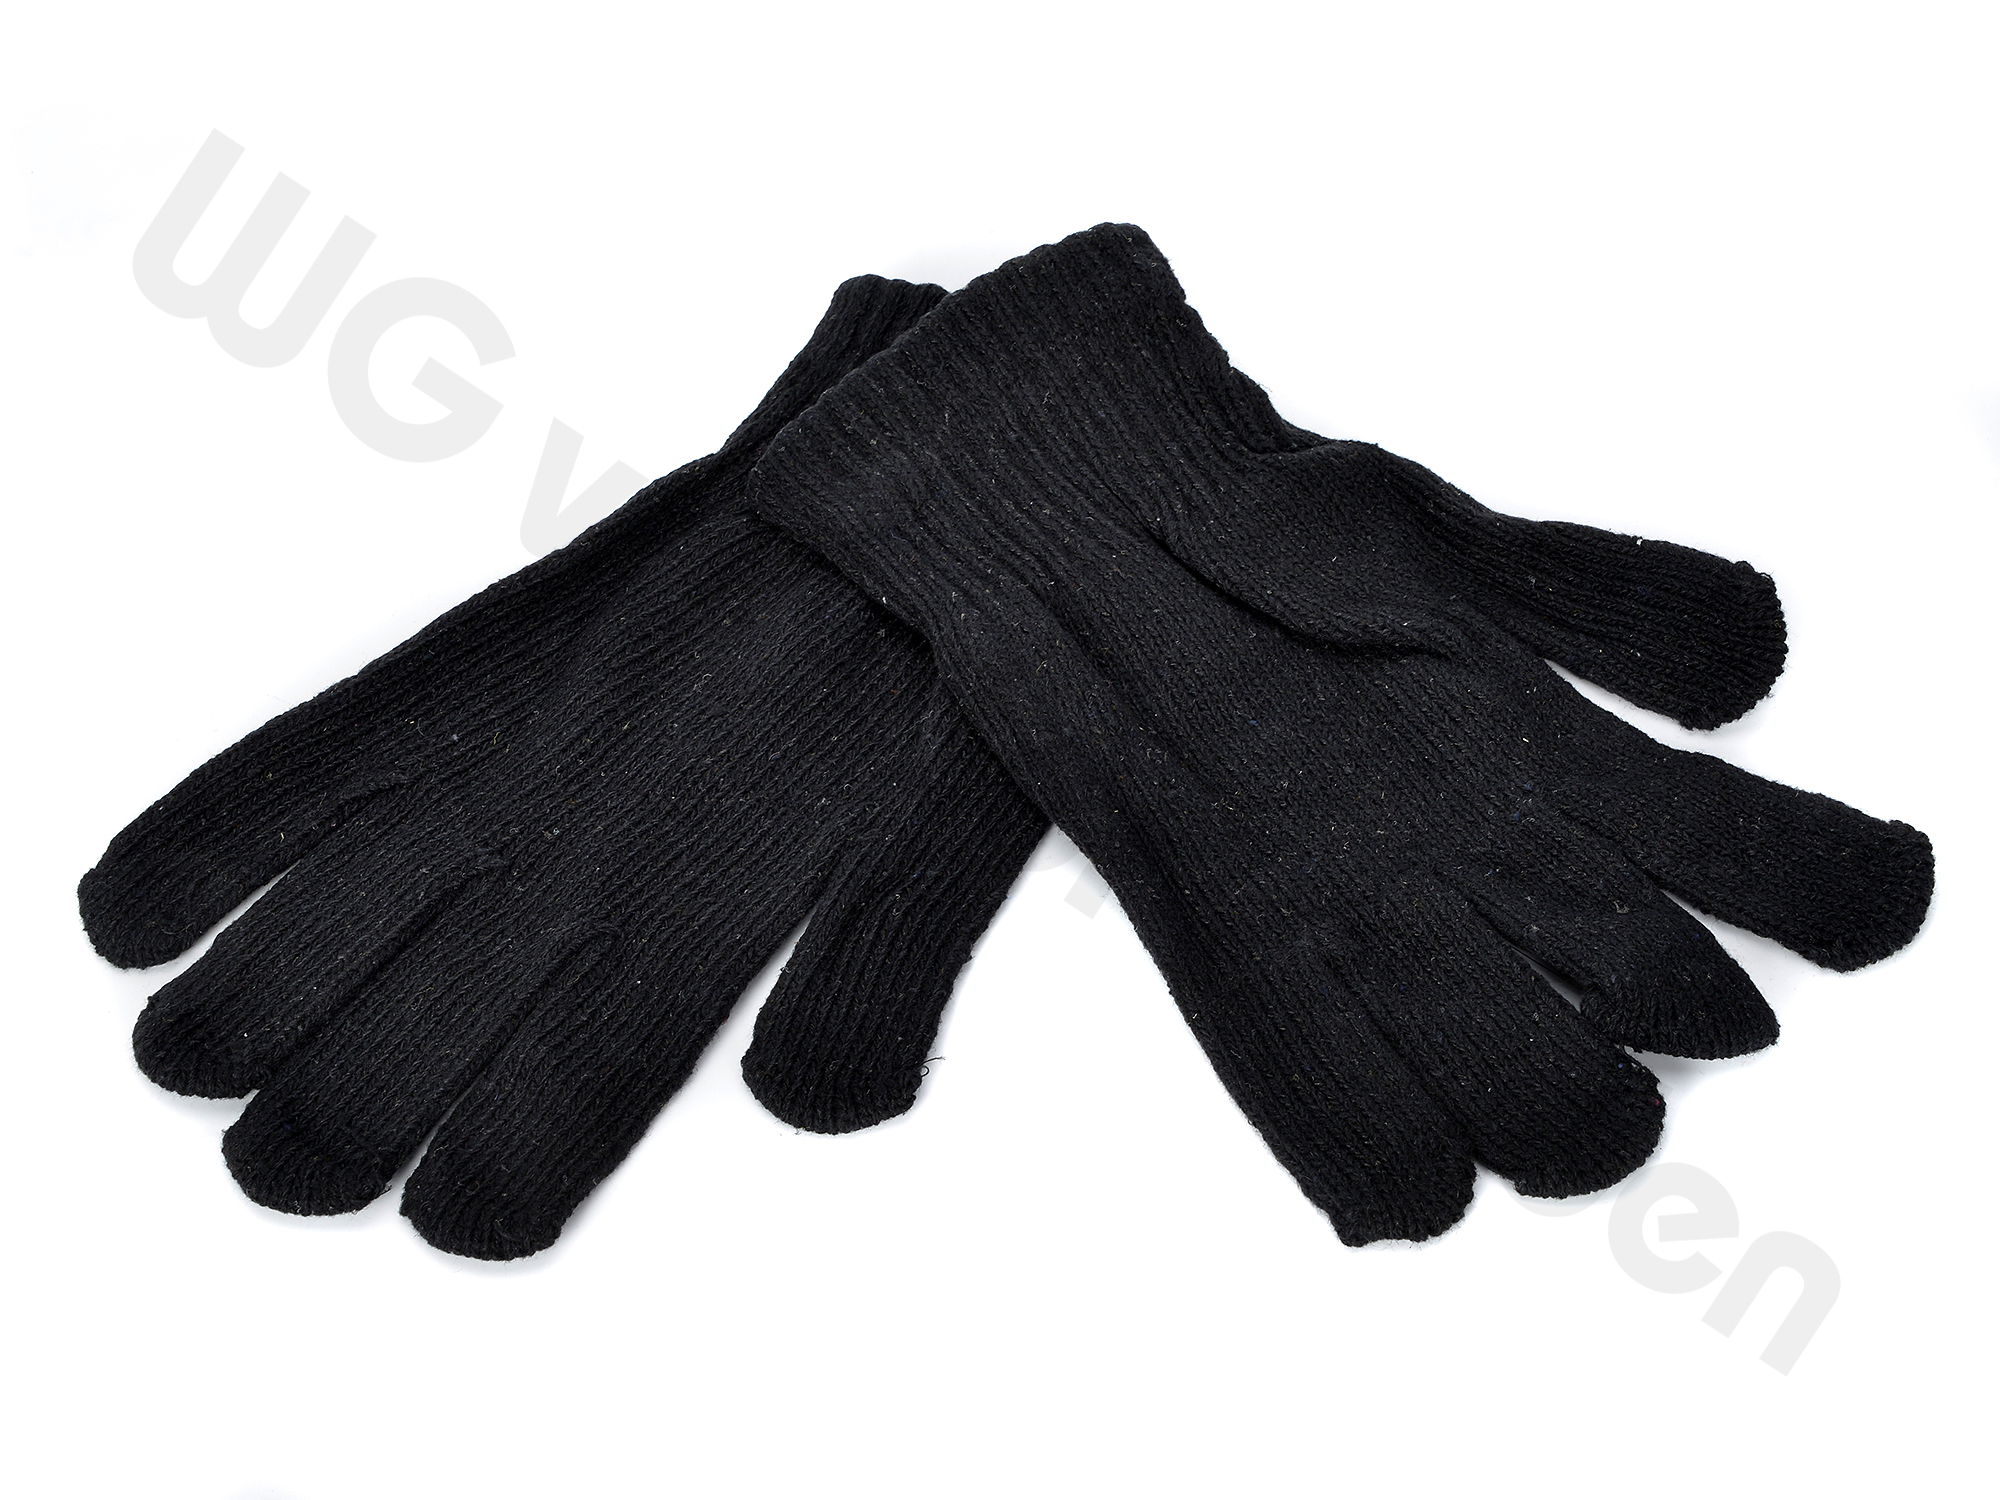 880008 GLOVES WORKING WINTER ACRYLIC KNITTED